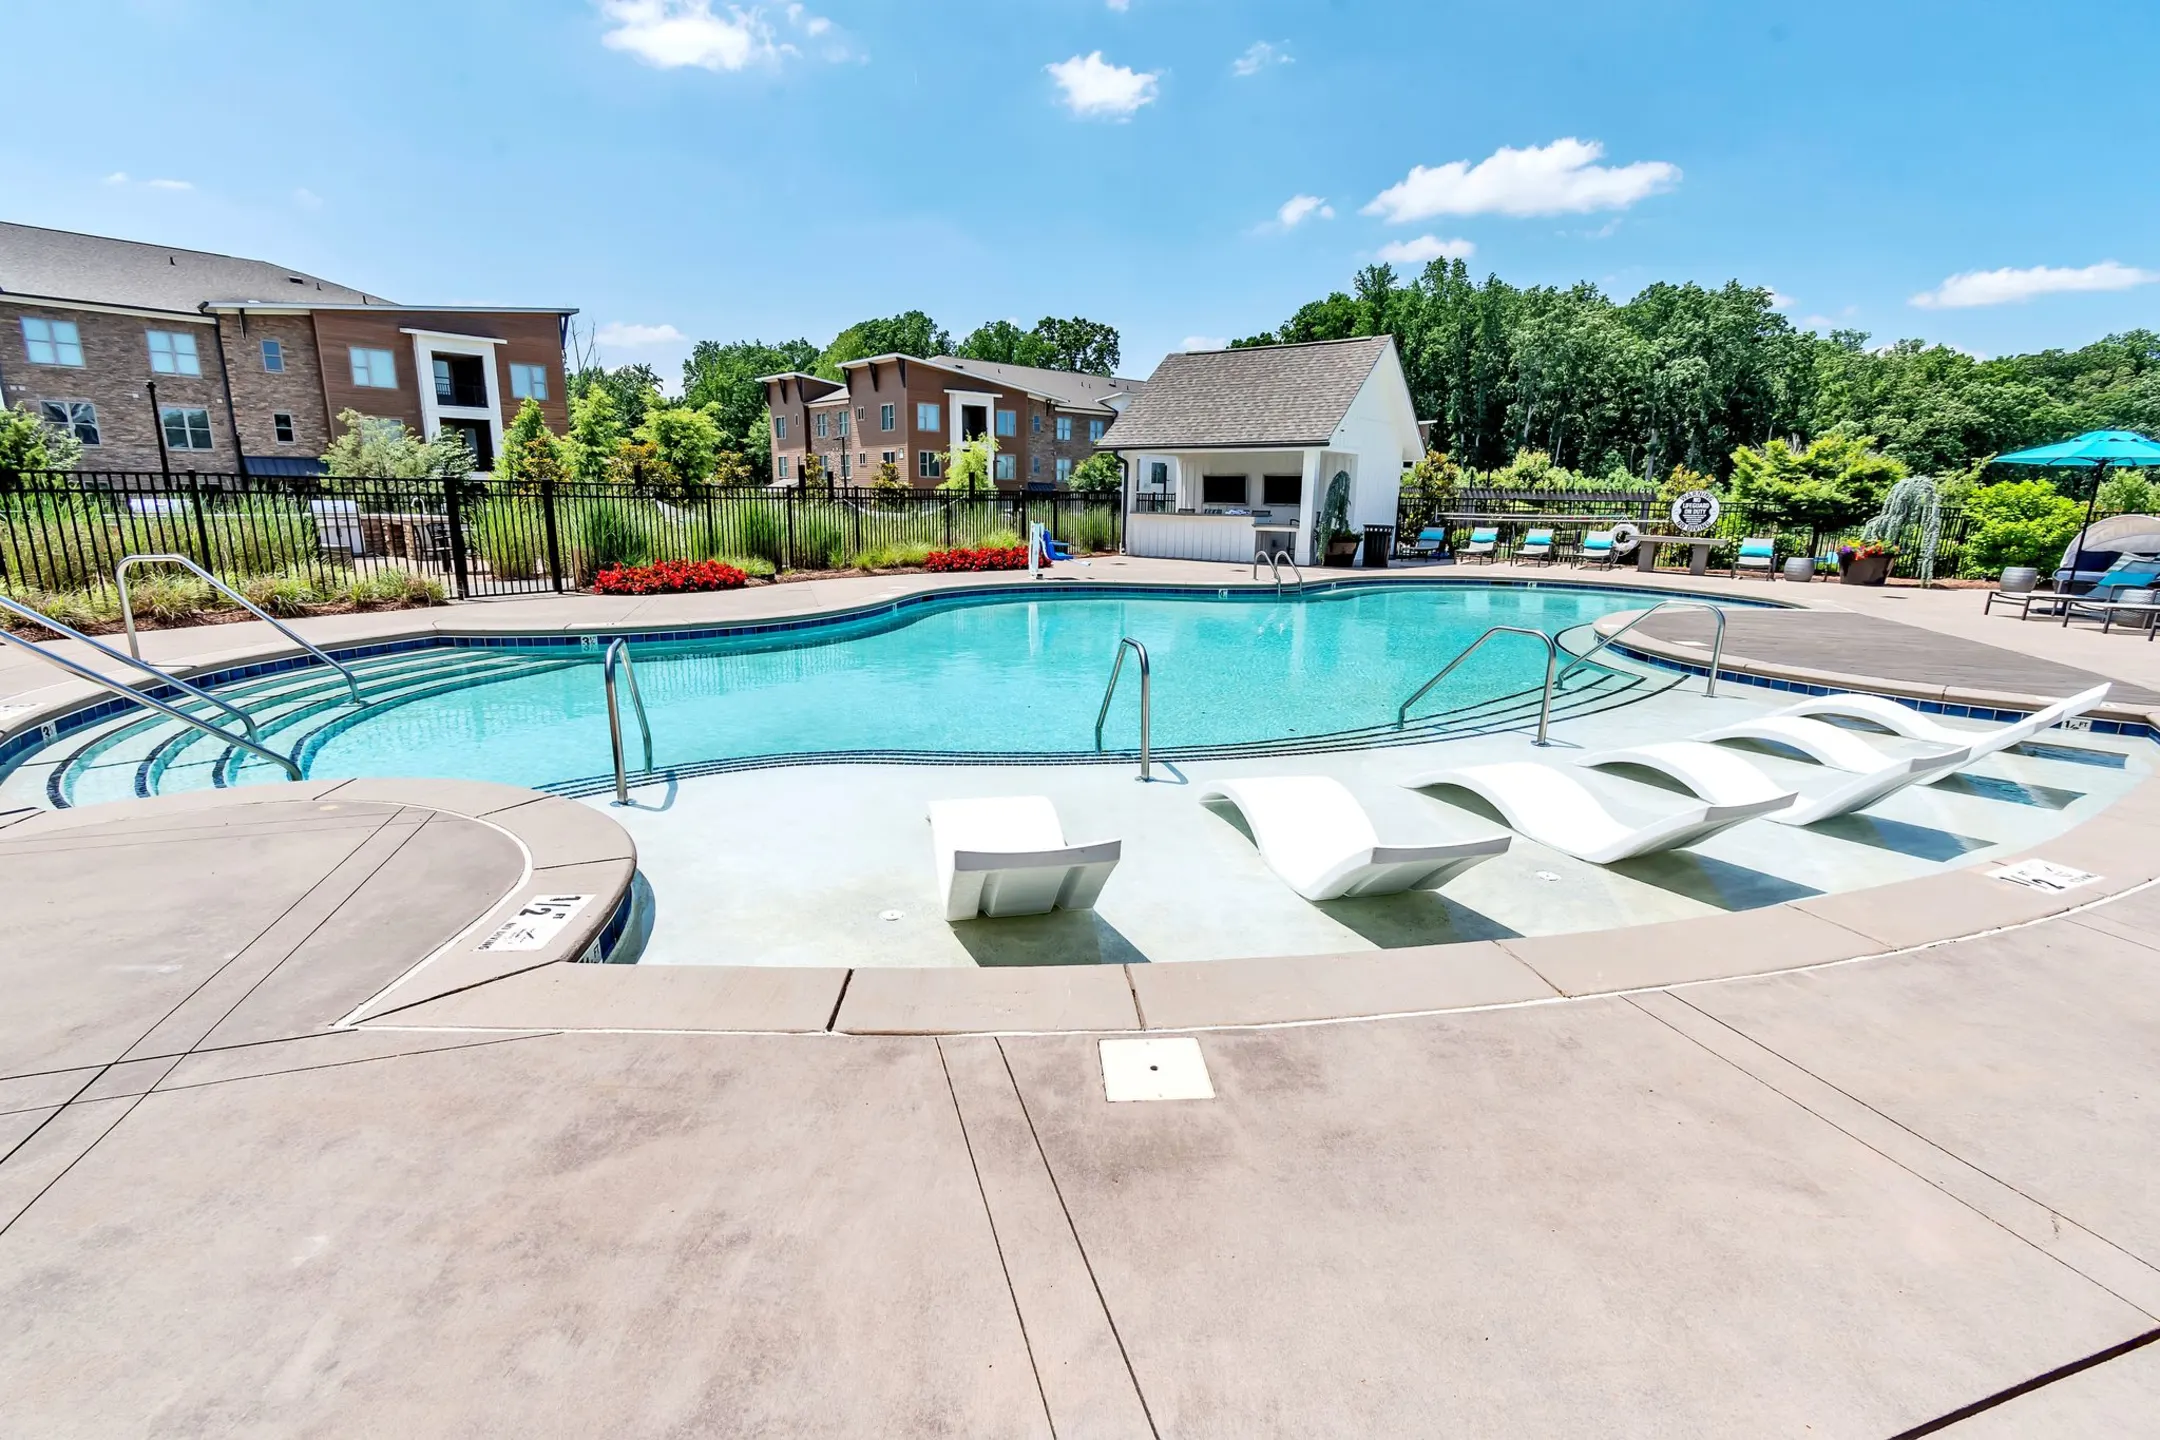 Pool - Pointe at Research Park Apartments - Charlotte, NC